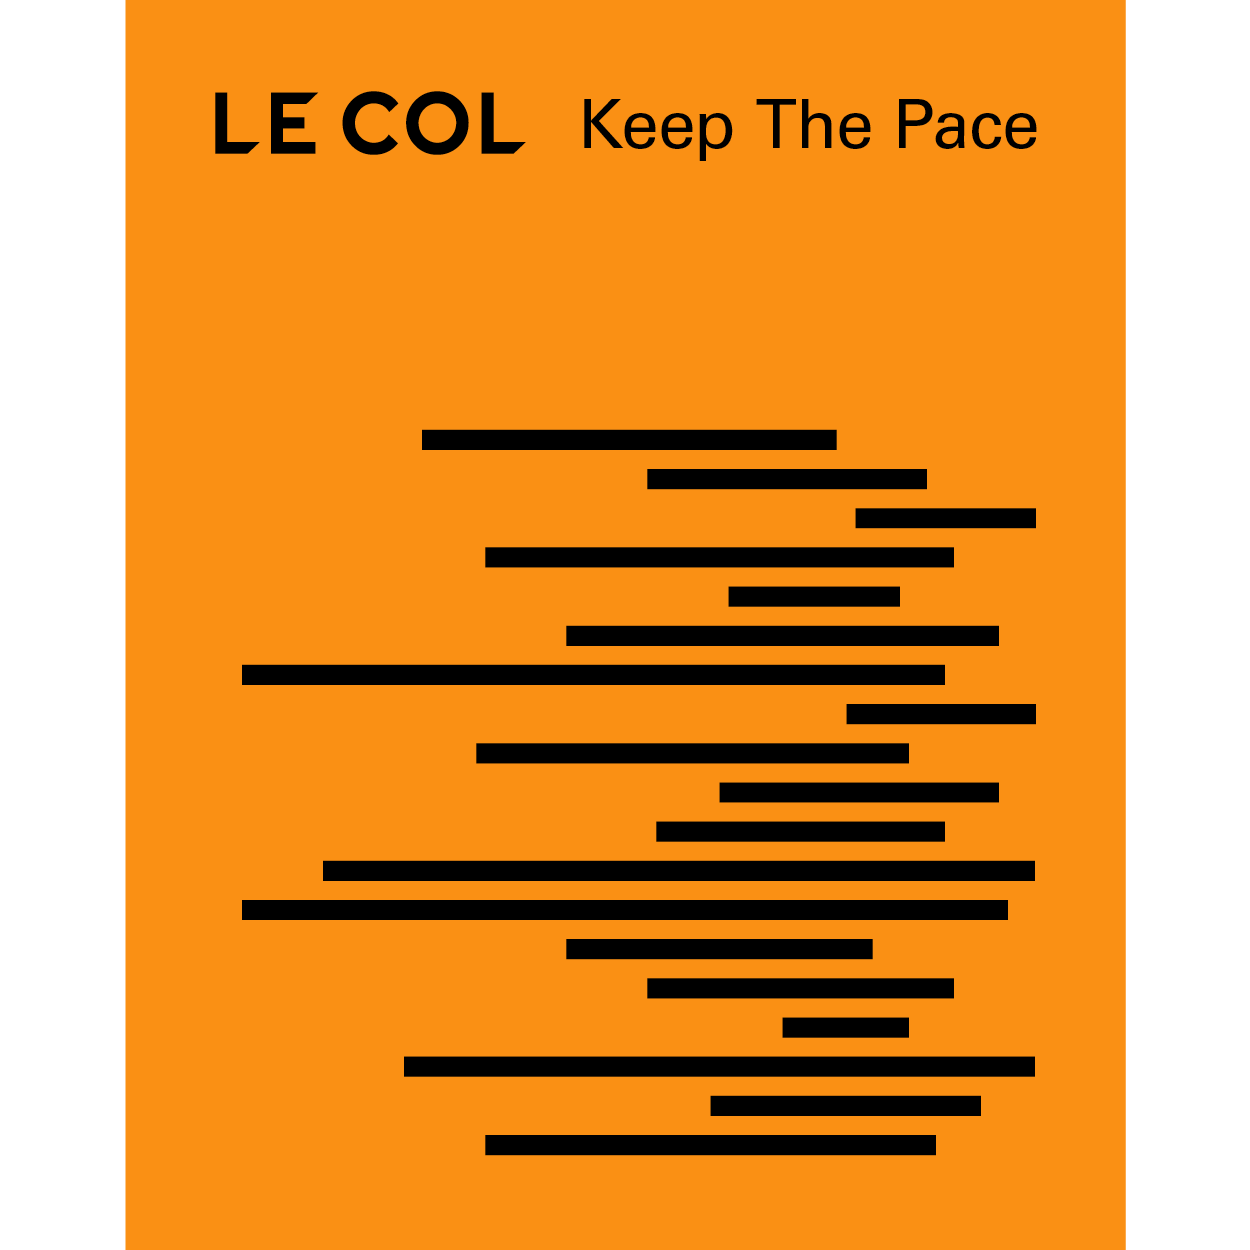 Le Col Keep The Pace Challenge